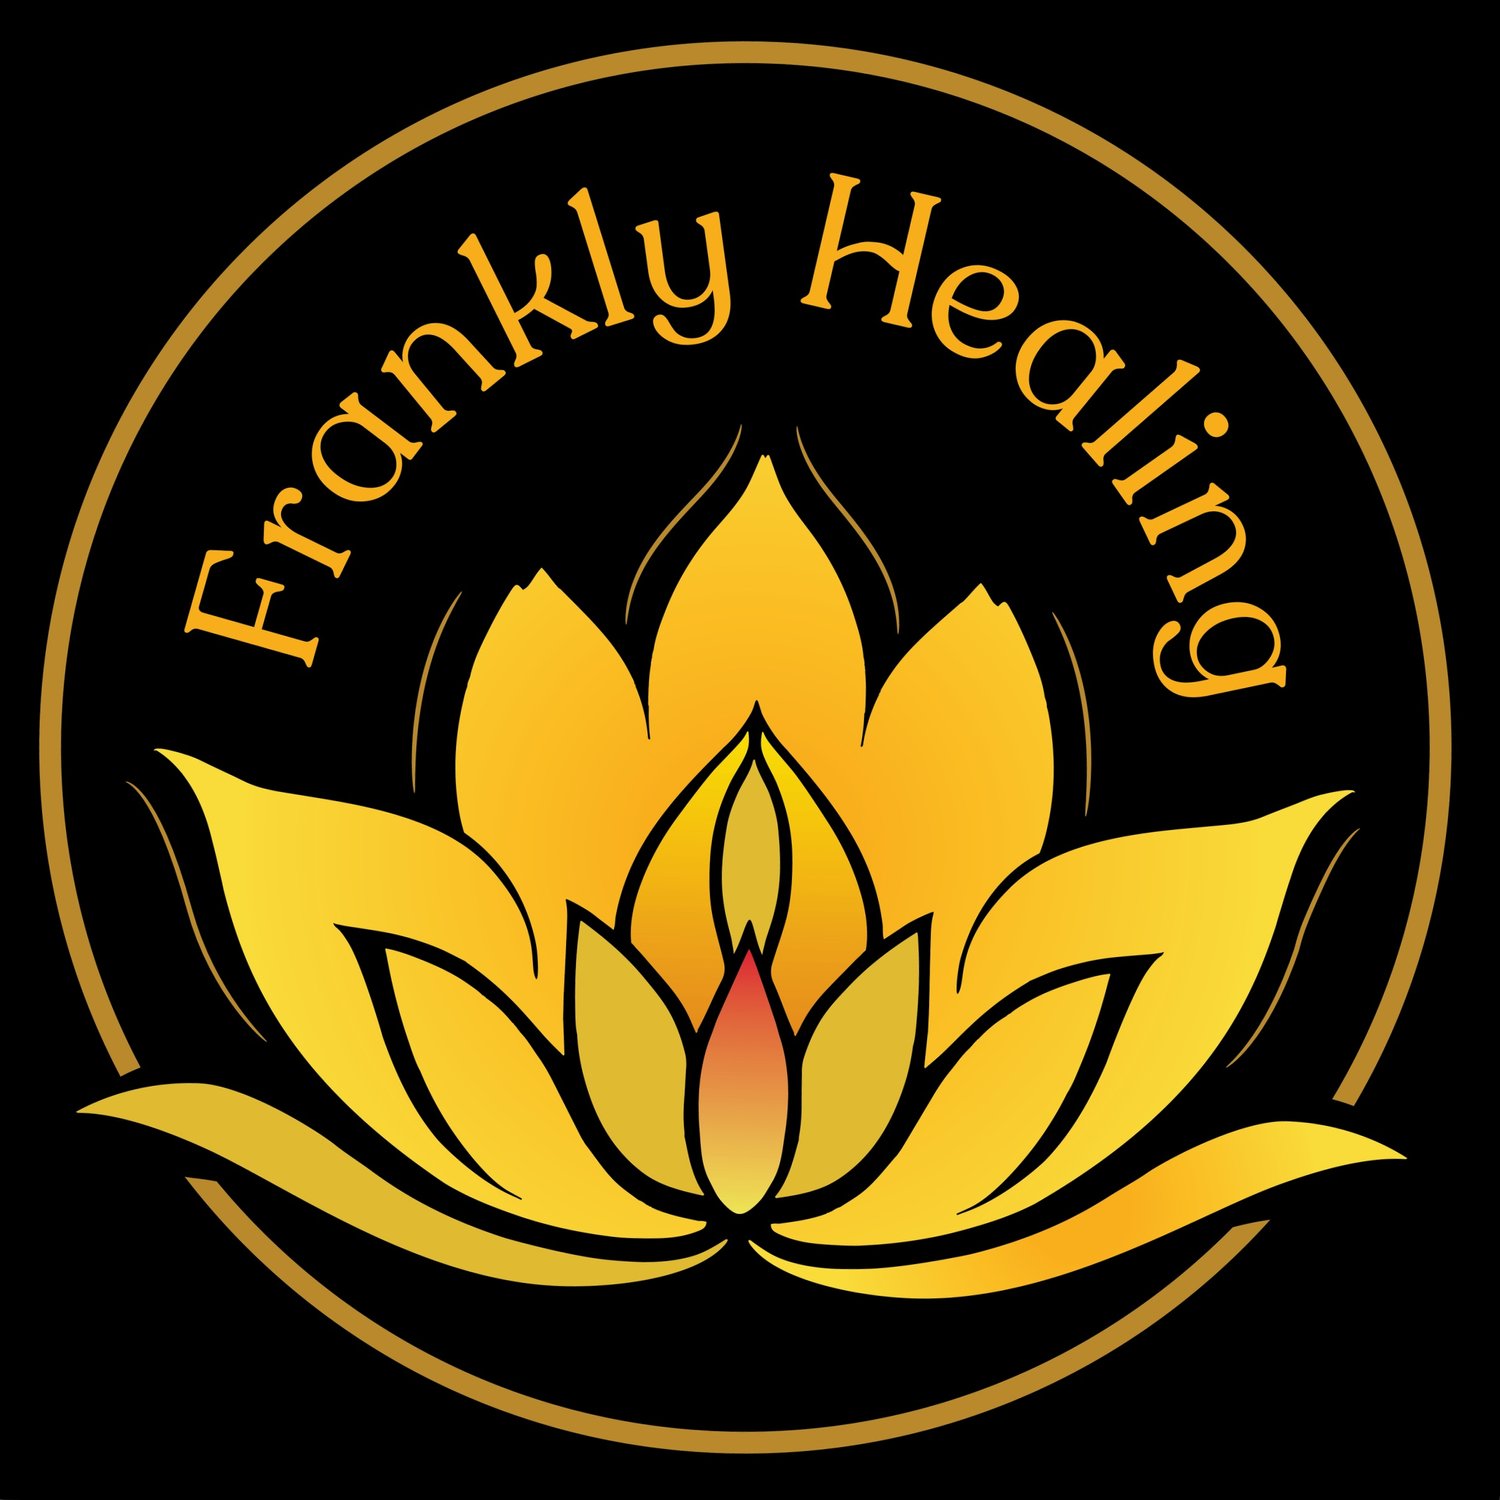  Frankly Healing